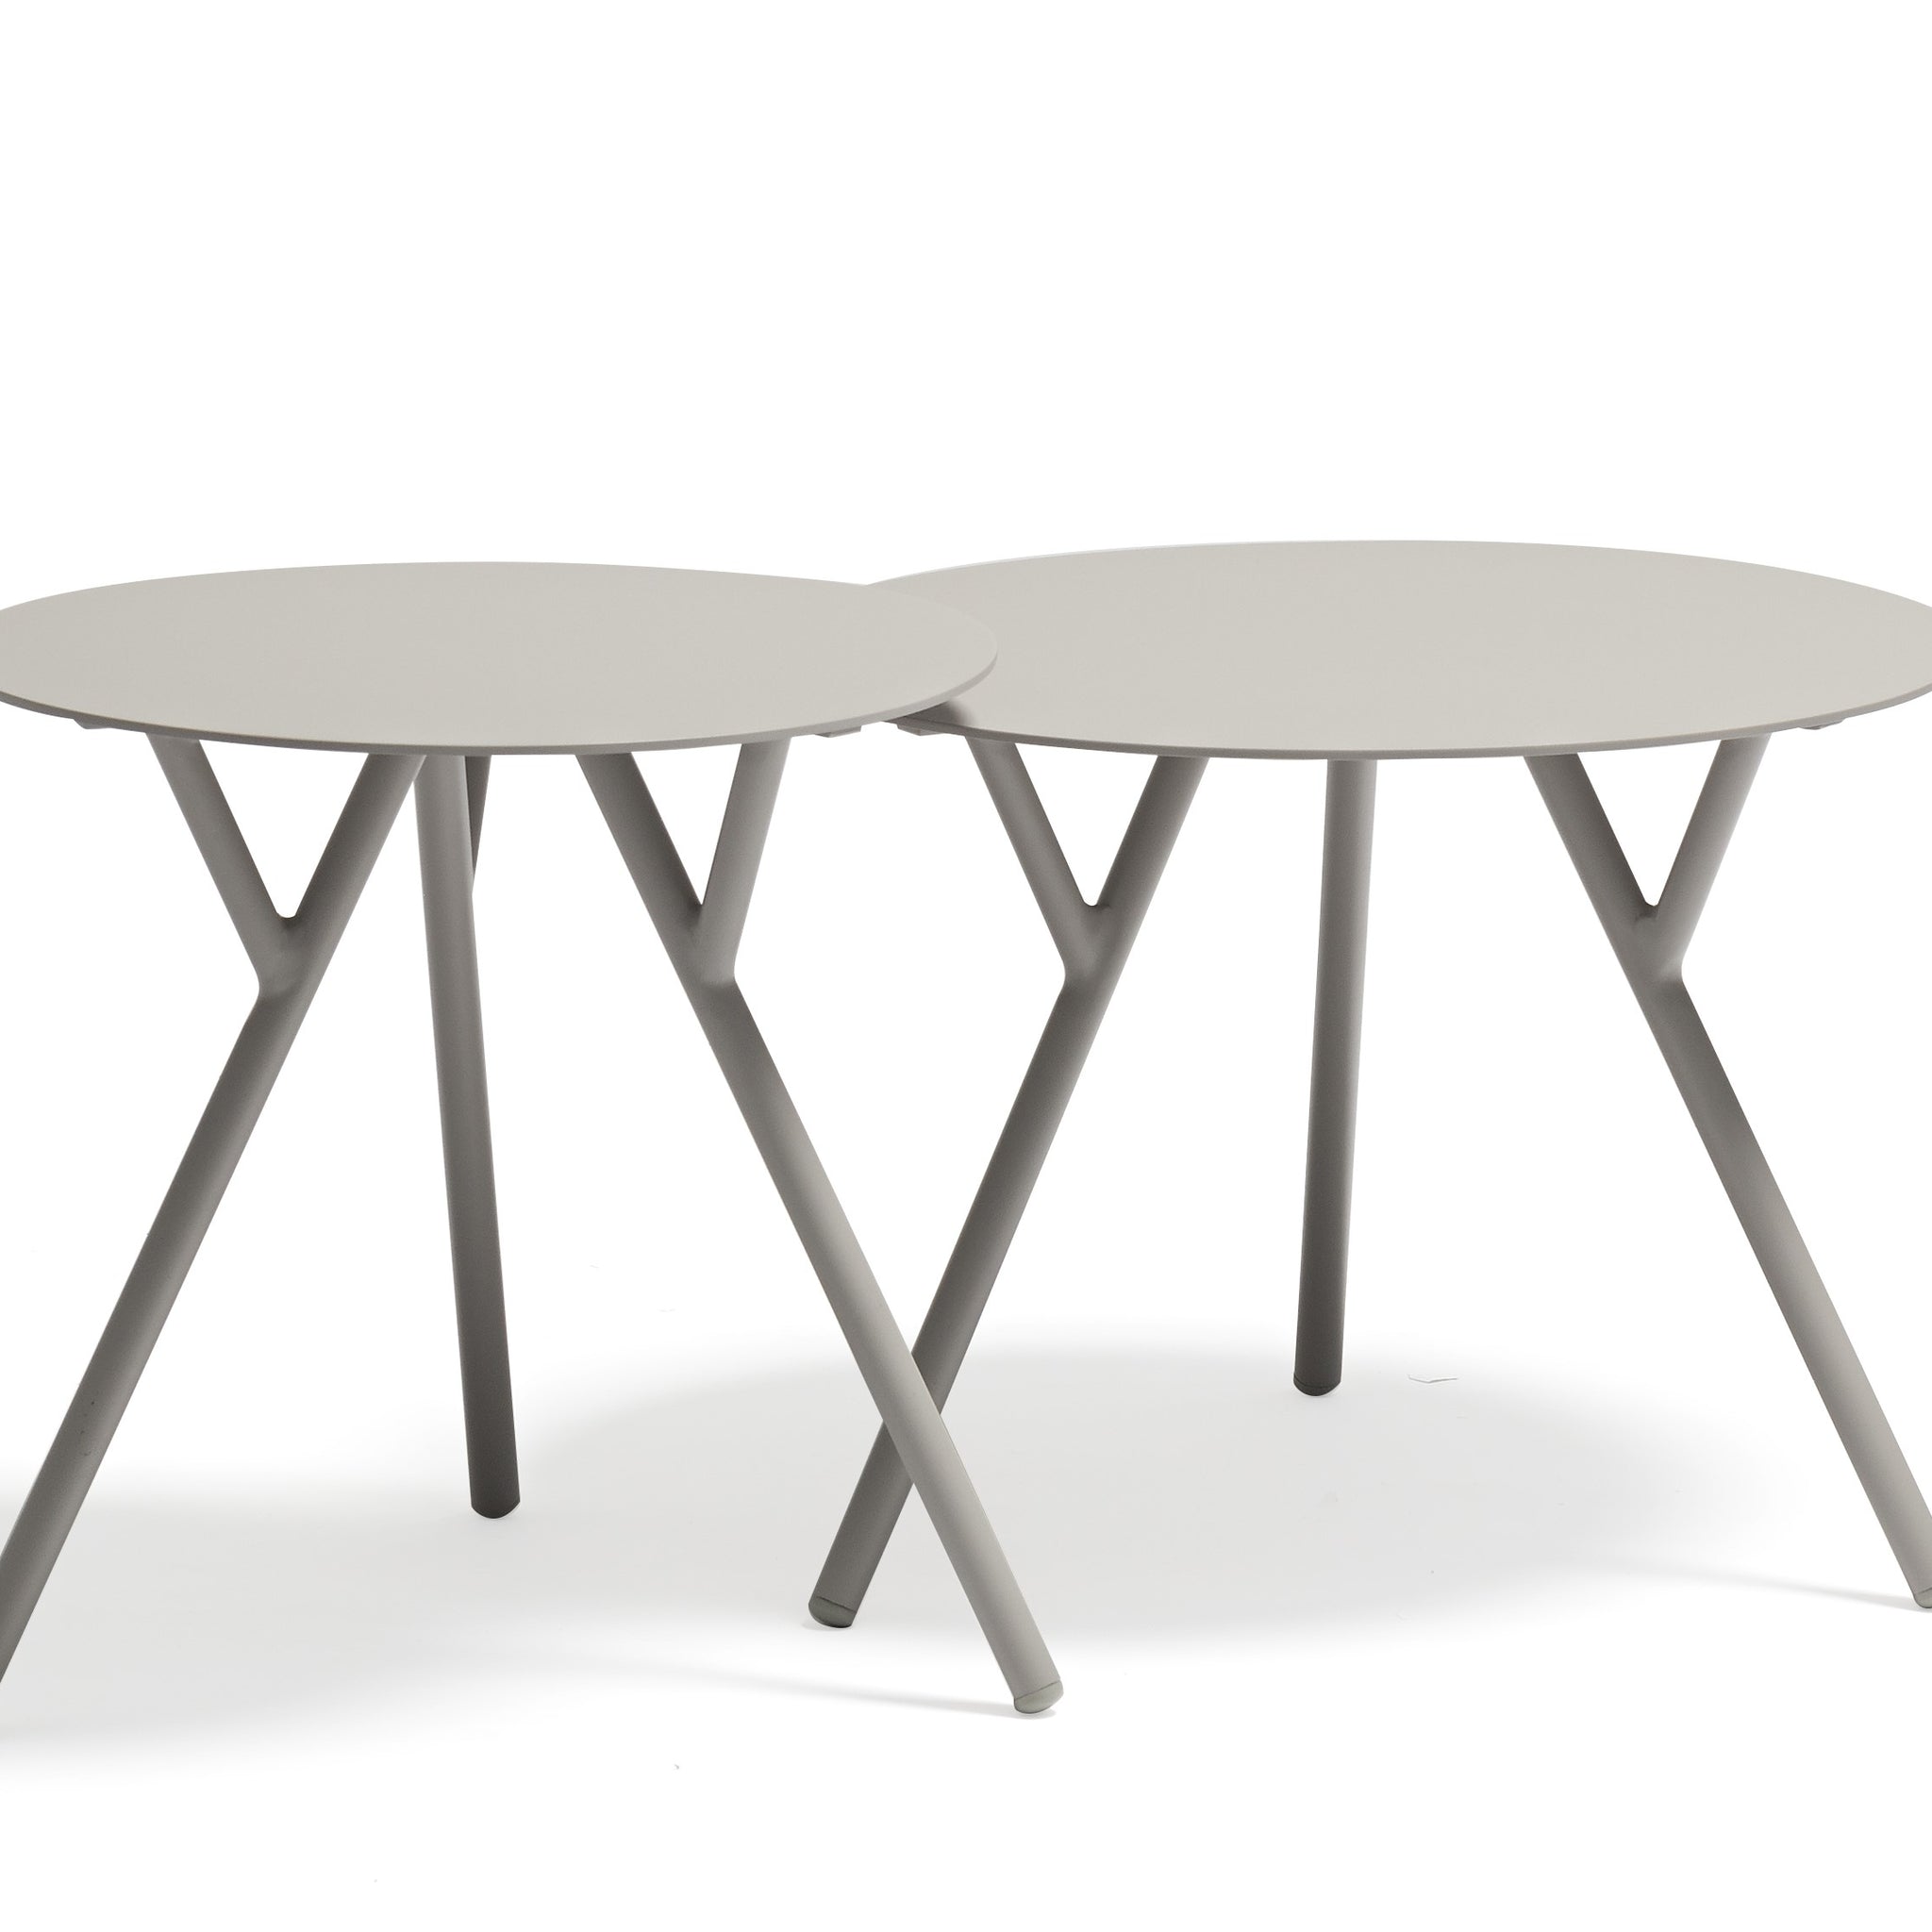 Contemporary side table suitable for all outdoor and indoor applications.